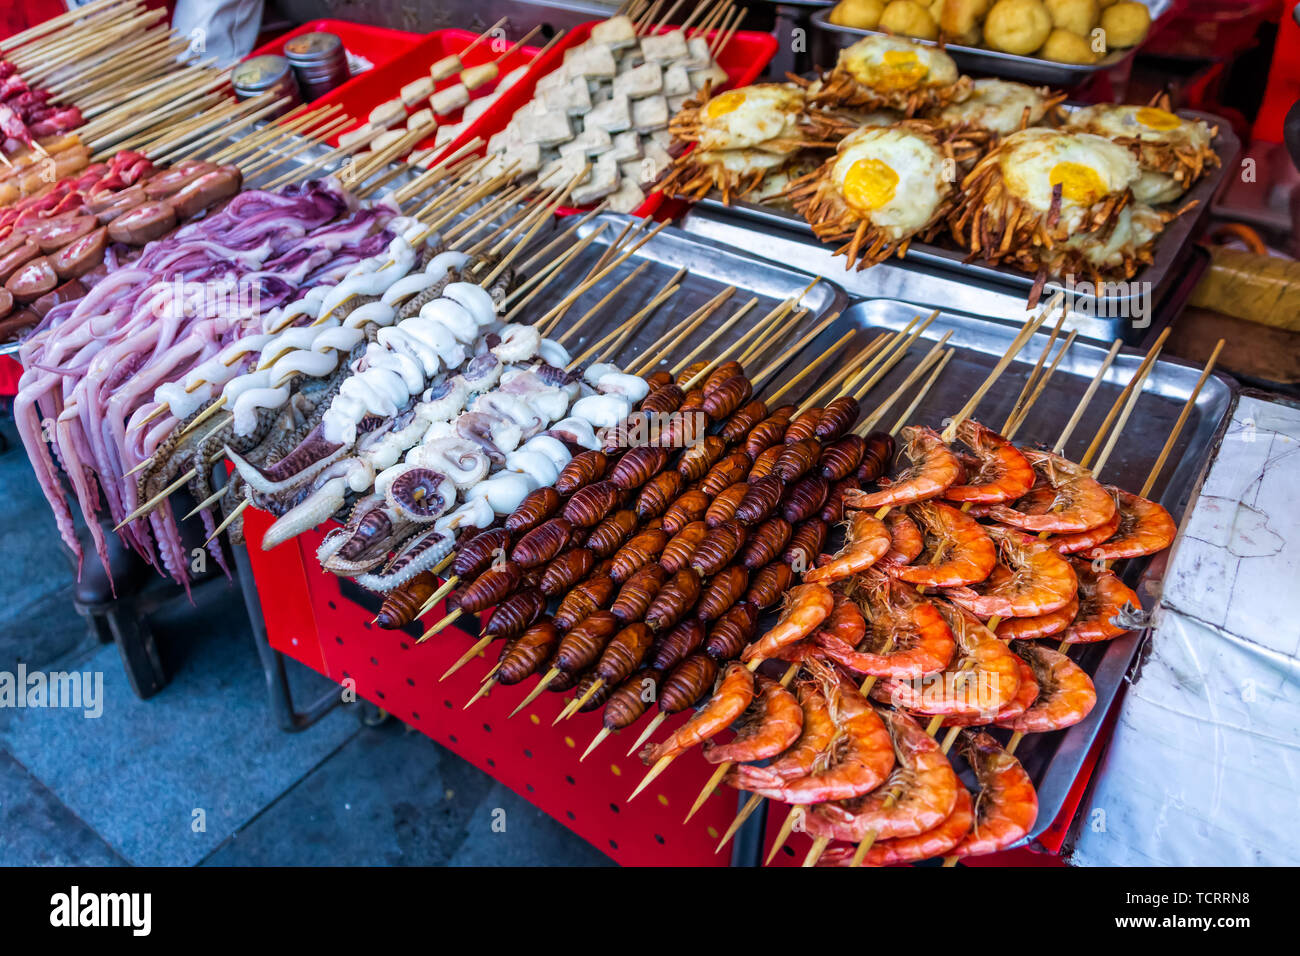 Roasted, fried and raw insects, silkworms, scorpions, bugs, snakes, dog meat, octopus on stick as snack street food in China Stock Photo